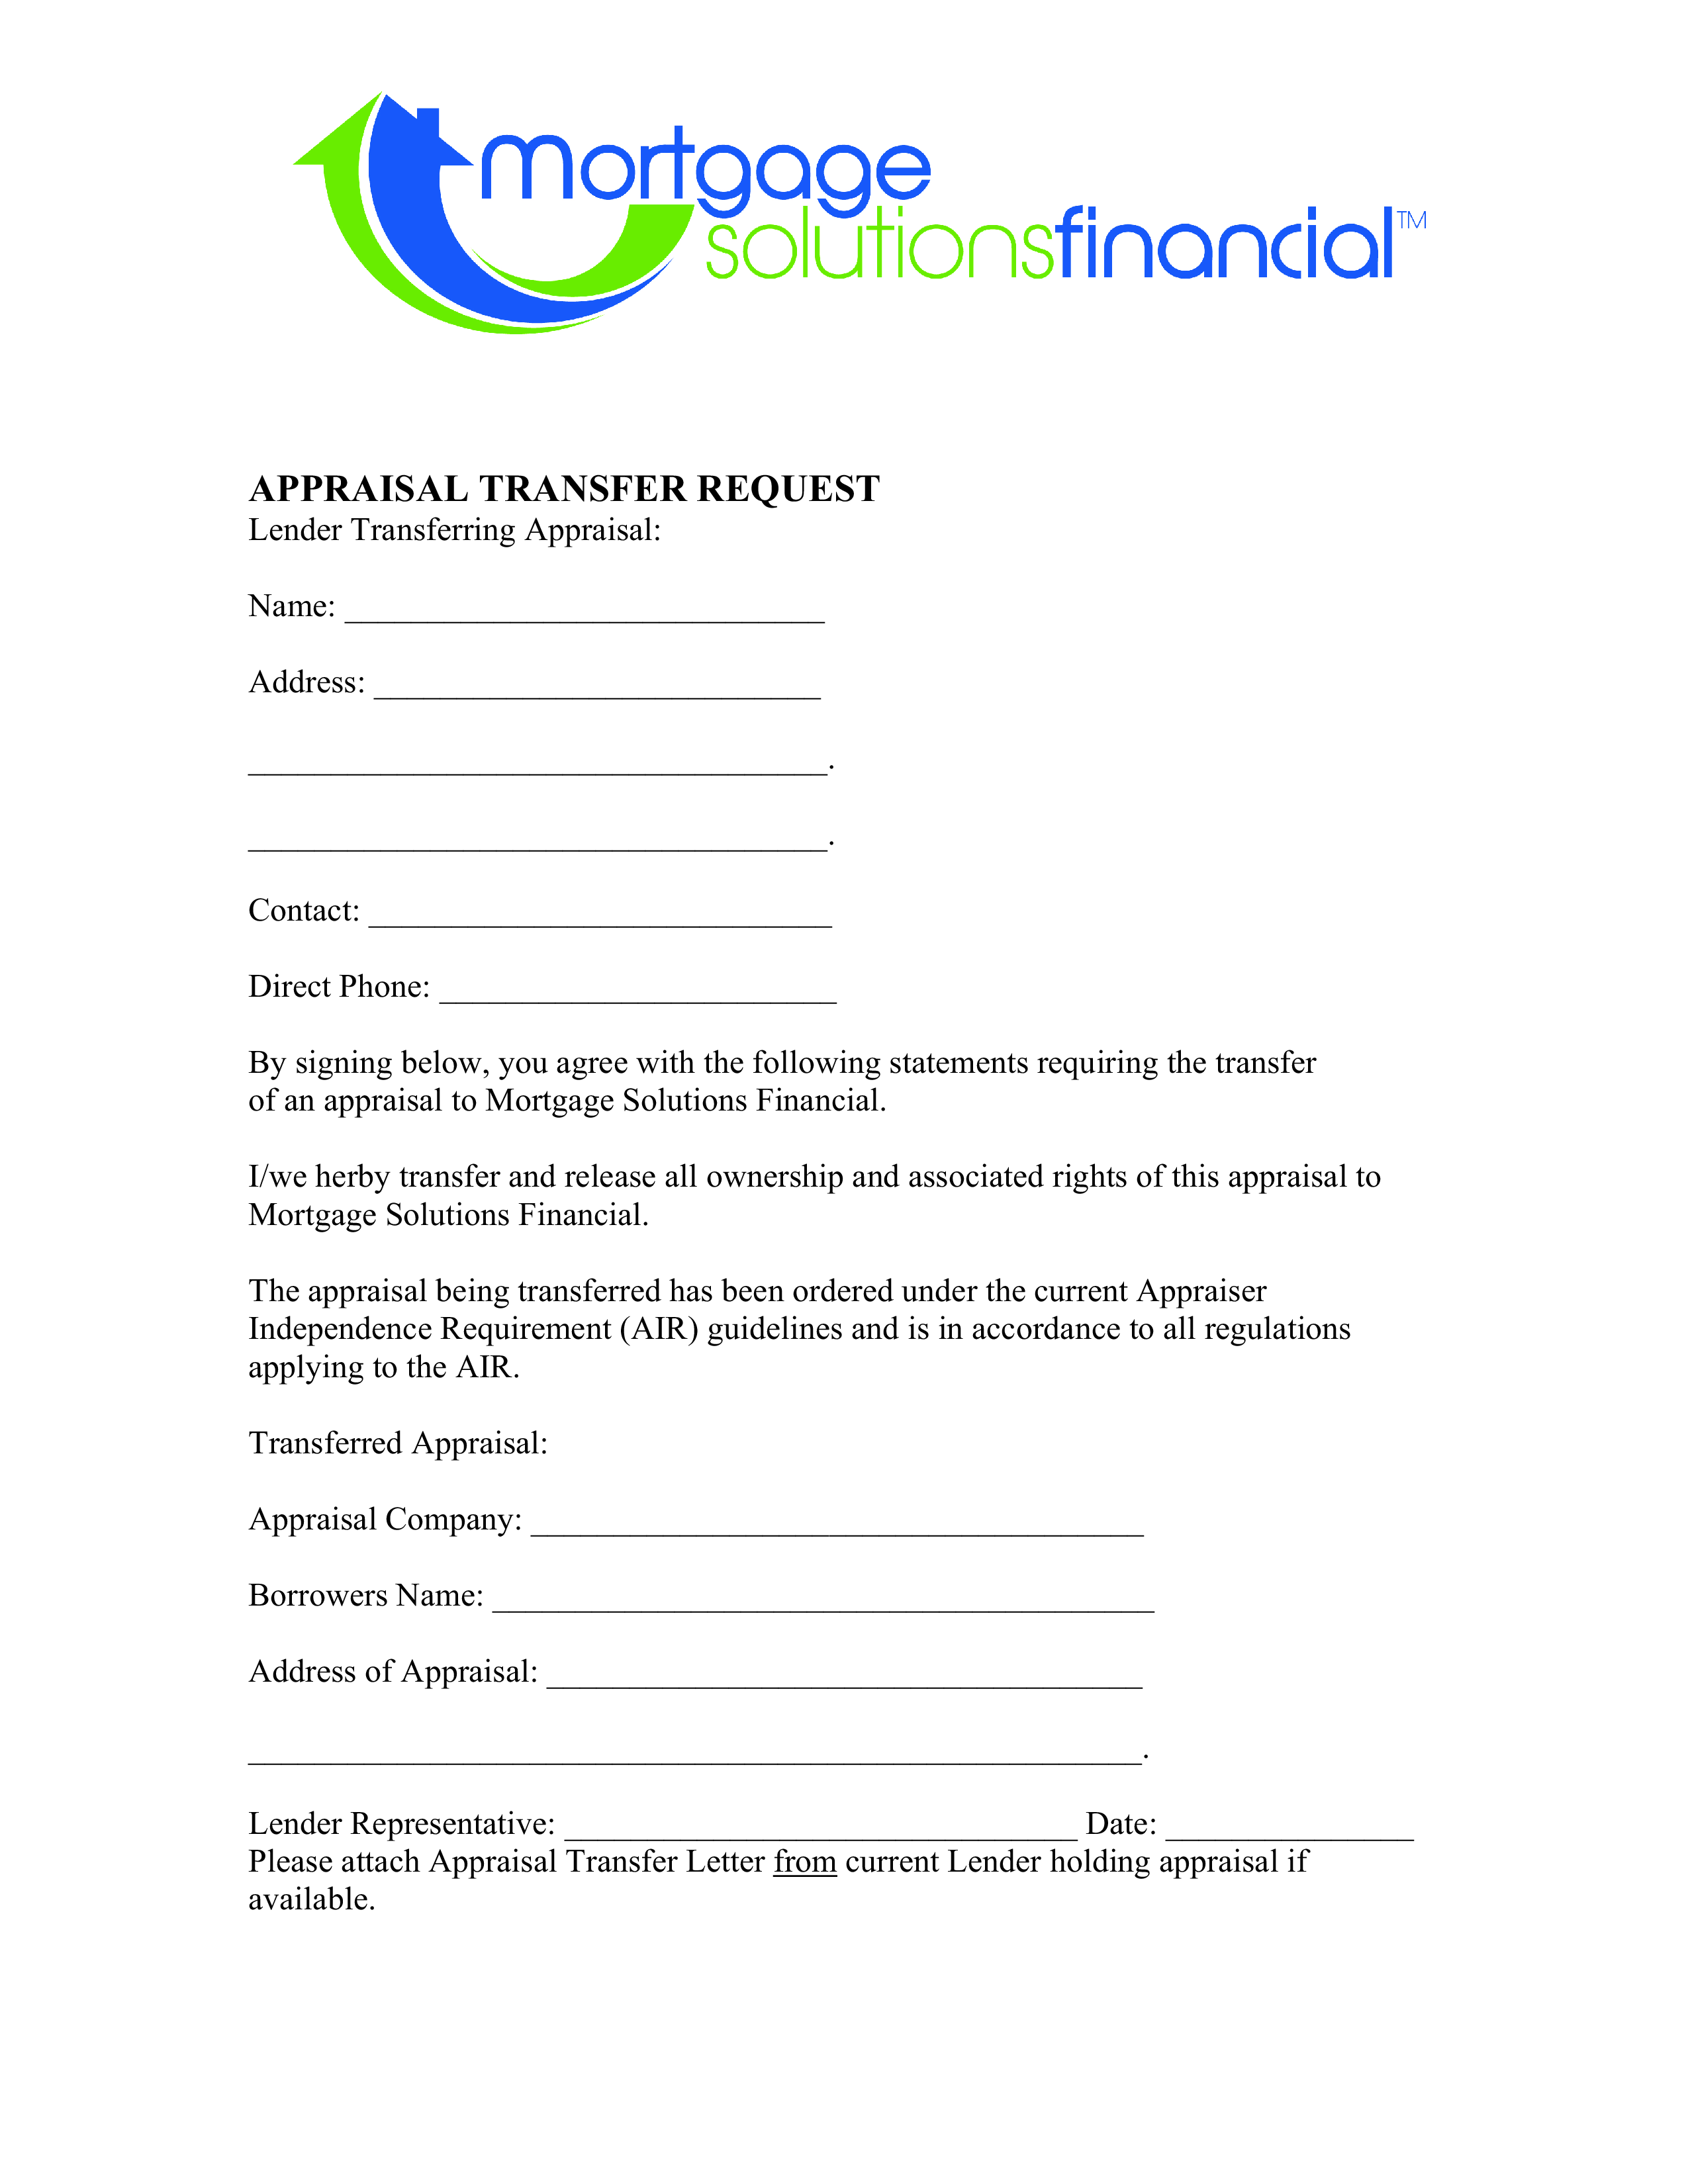 appraisal transfer request letter template